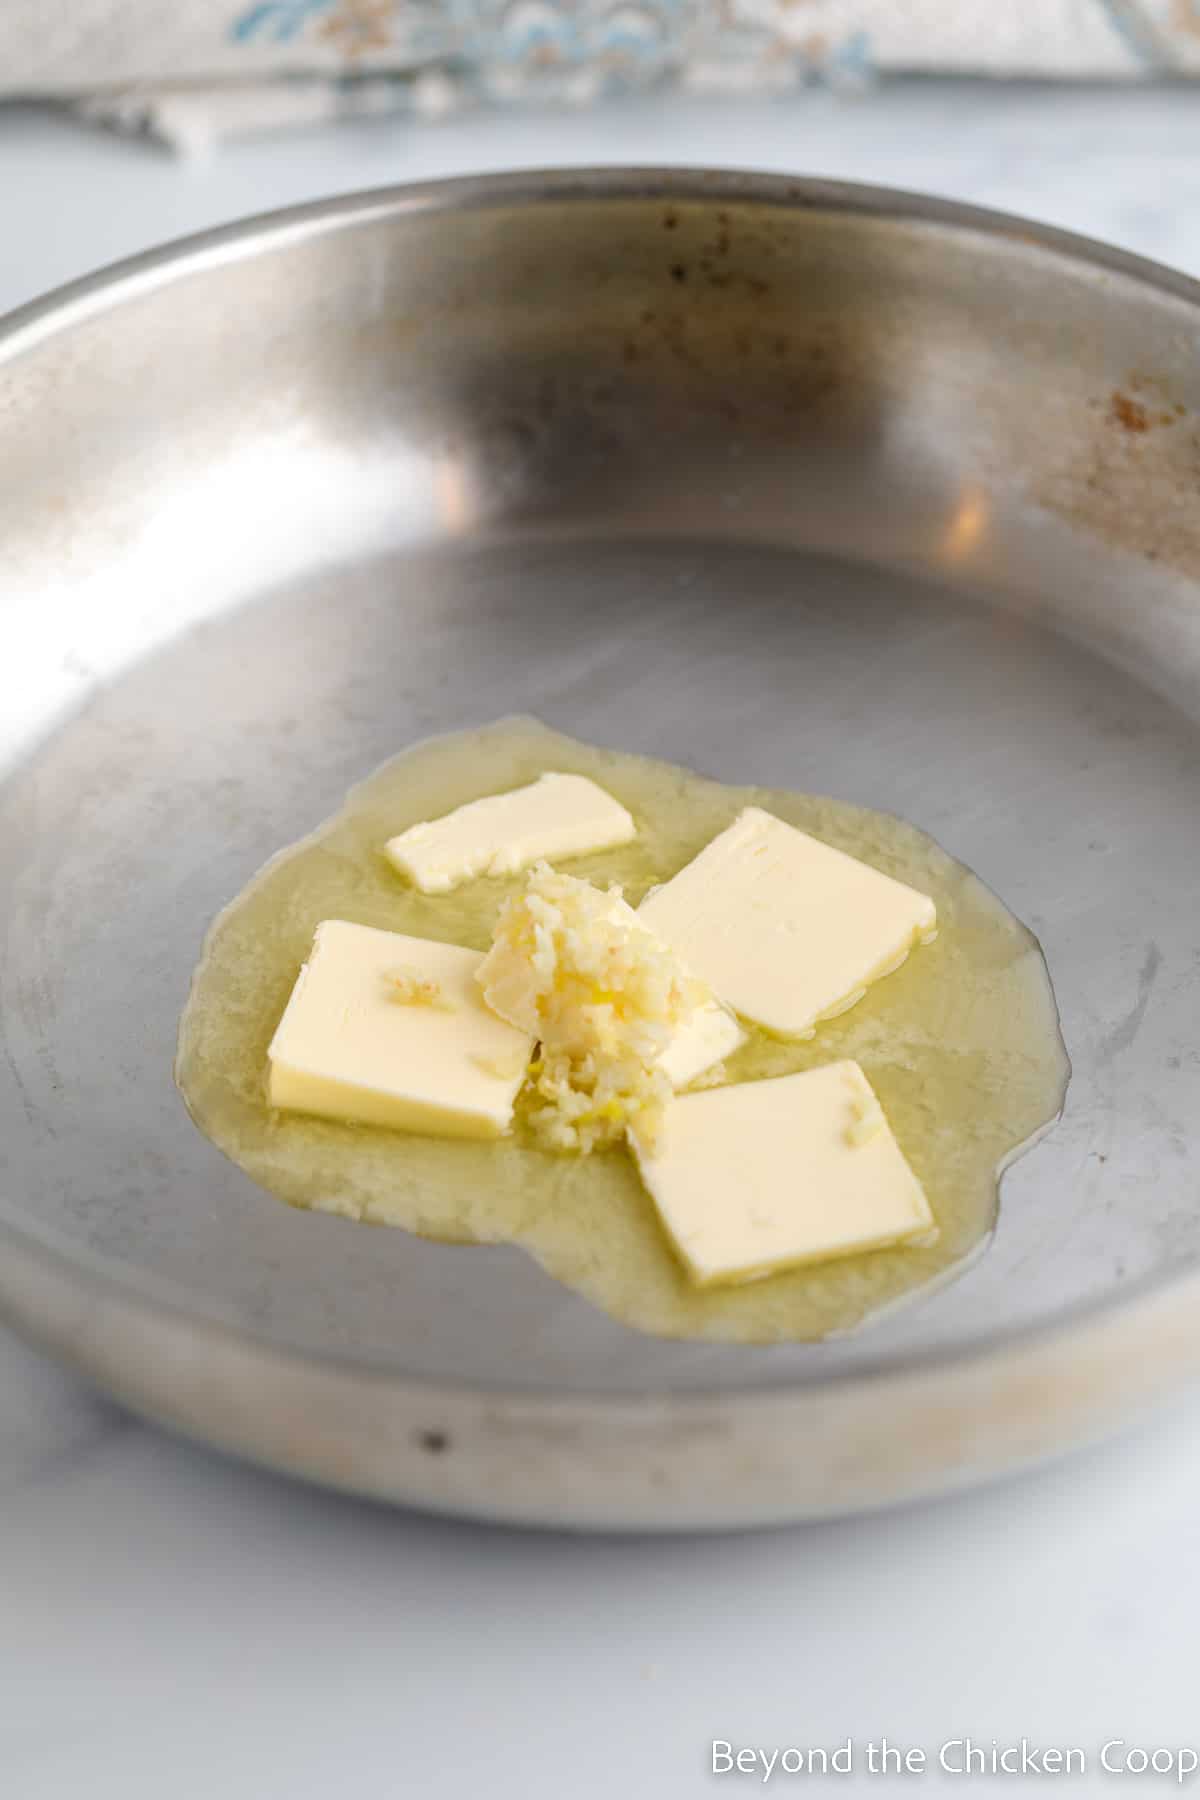 Butter melting in a pan with garlic.